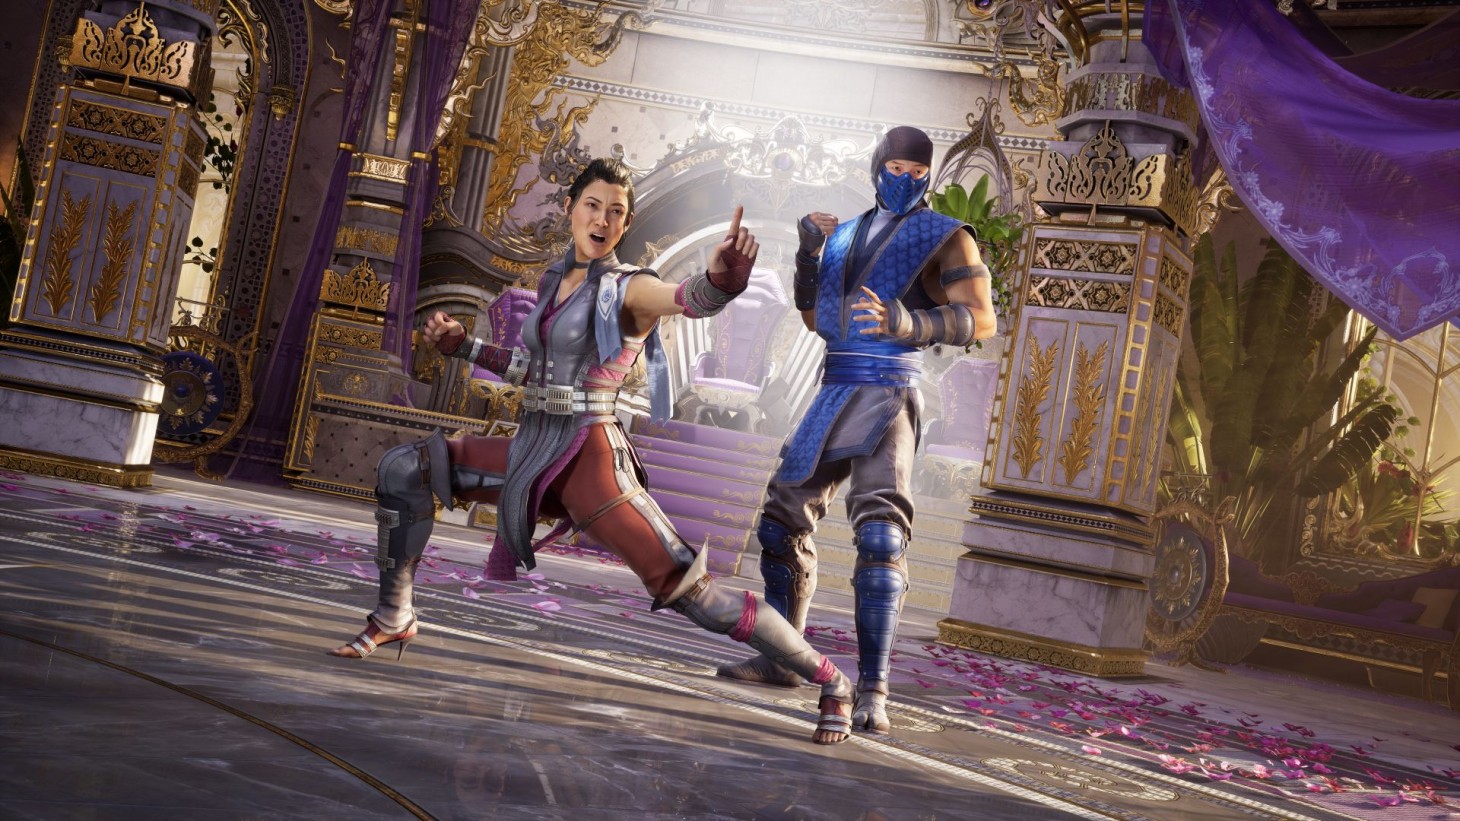 Mortal Kombat 1 PC Requirements: Is Your PC Ready to Fight